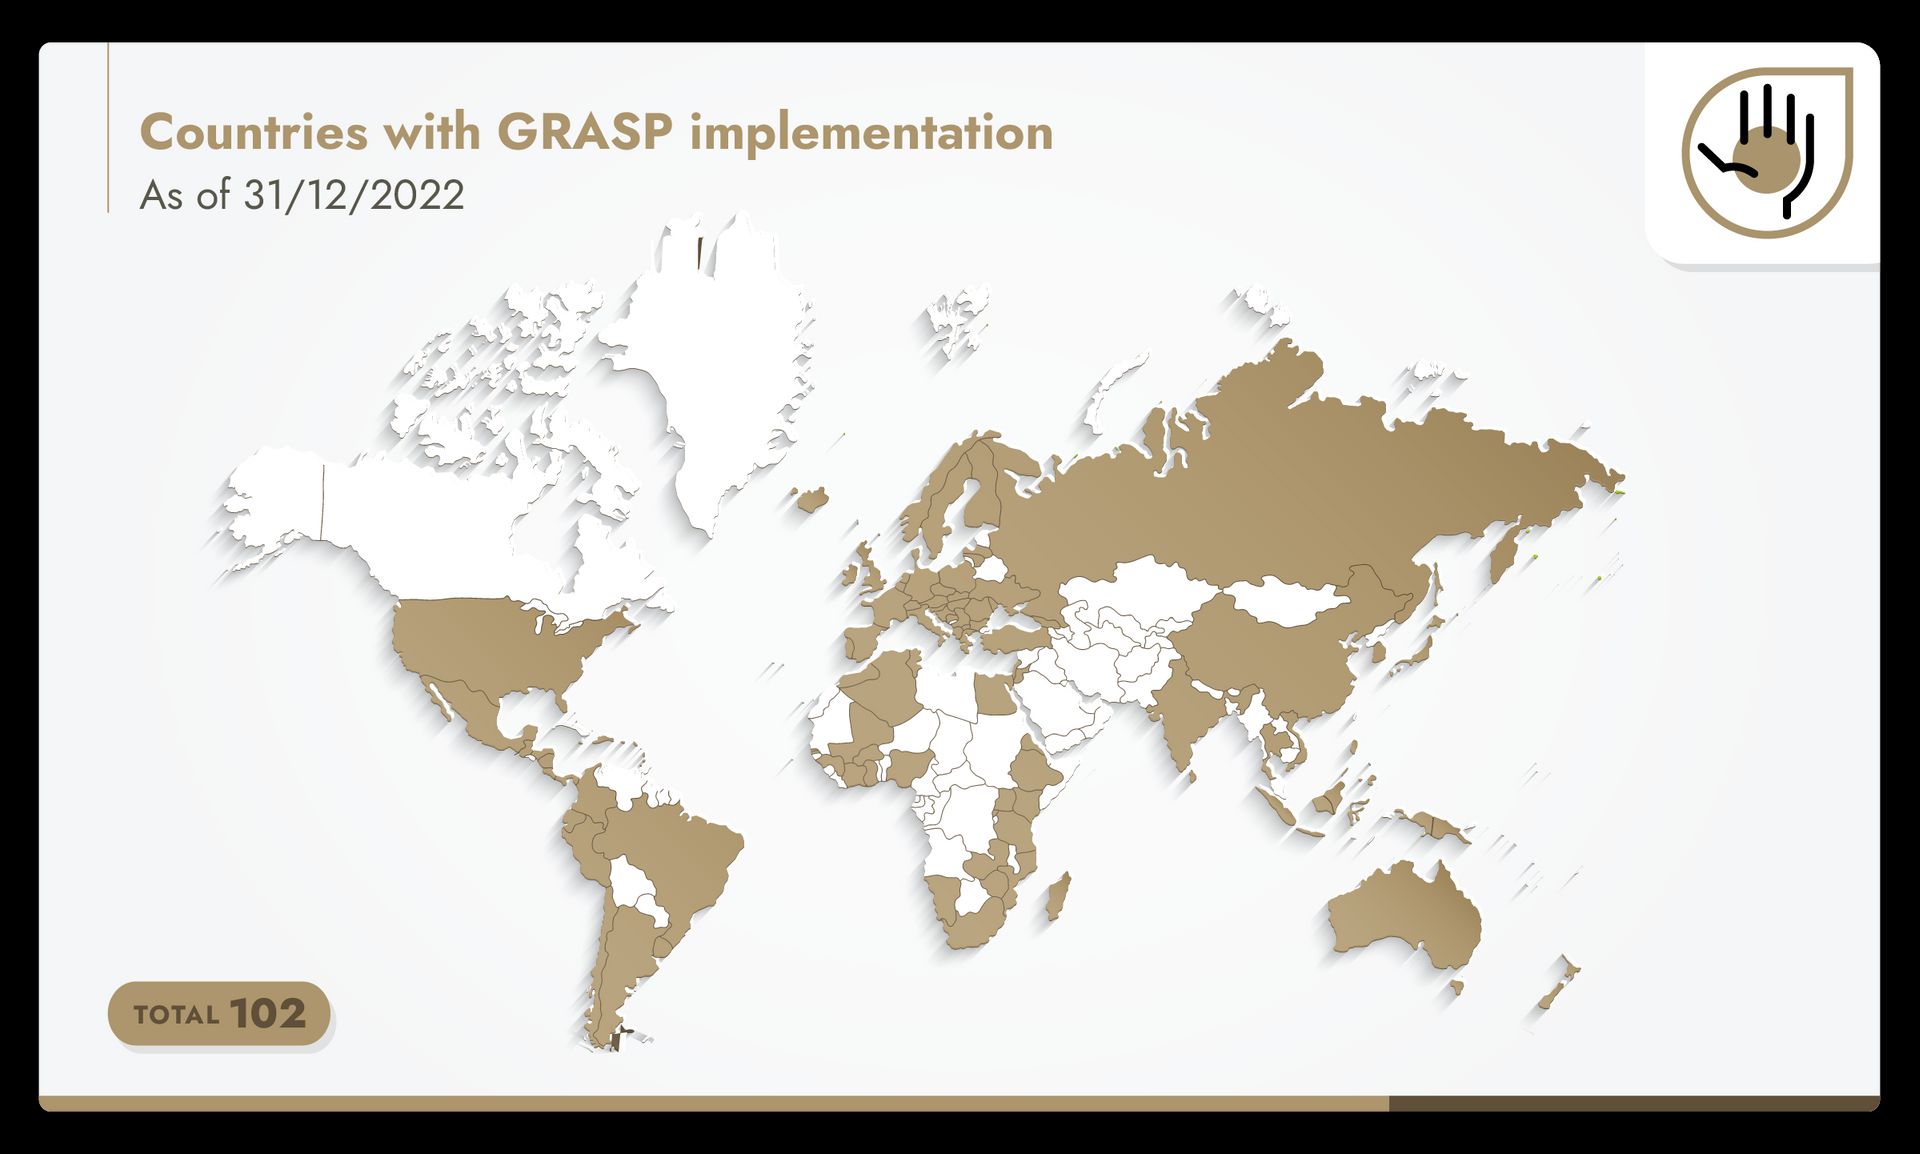 Infographic of a world map identifying countries with GLOBALG.A.P. Risk Assessment on Social Practice implementation